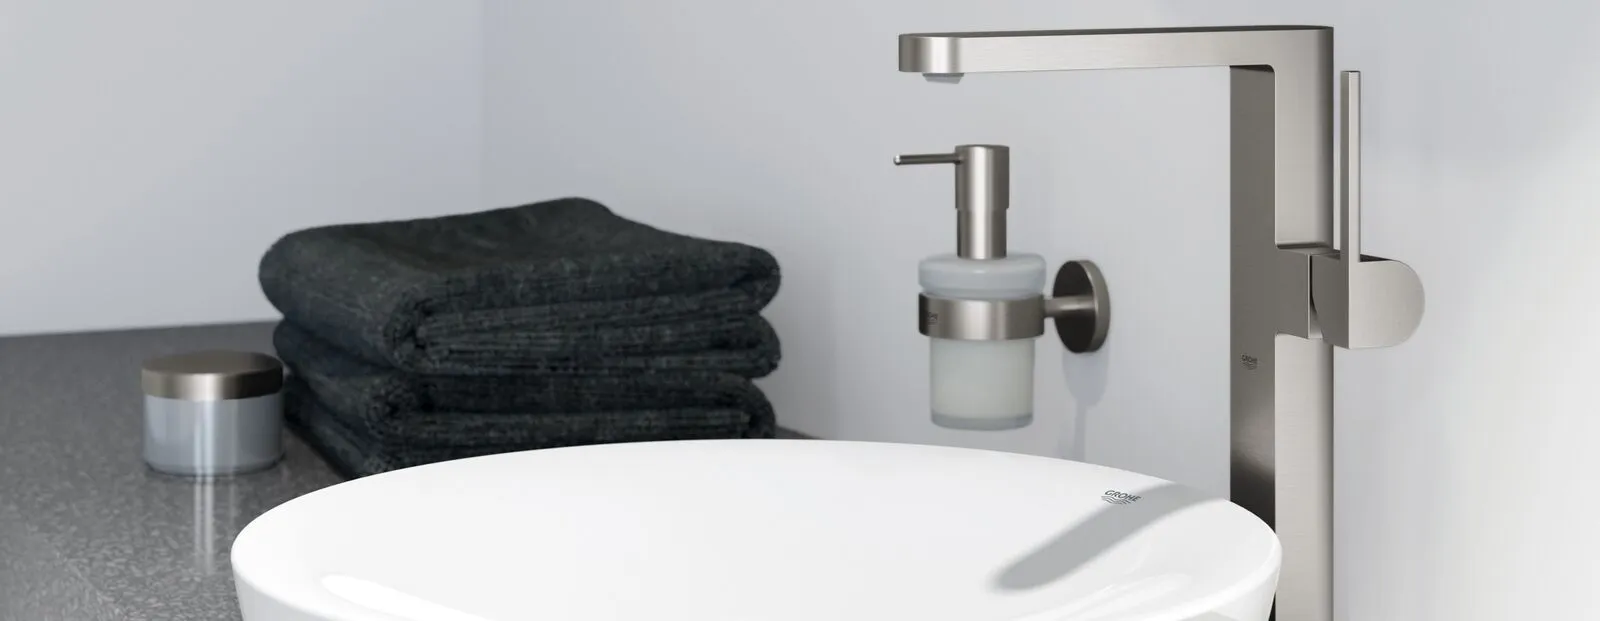 Grohe_ZZH_T32618E03_000_01.jpg